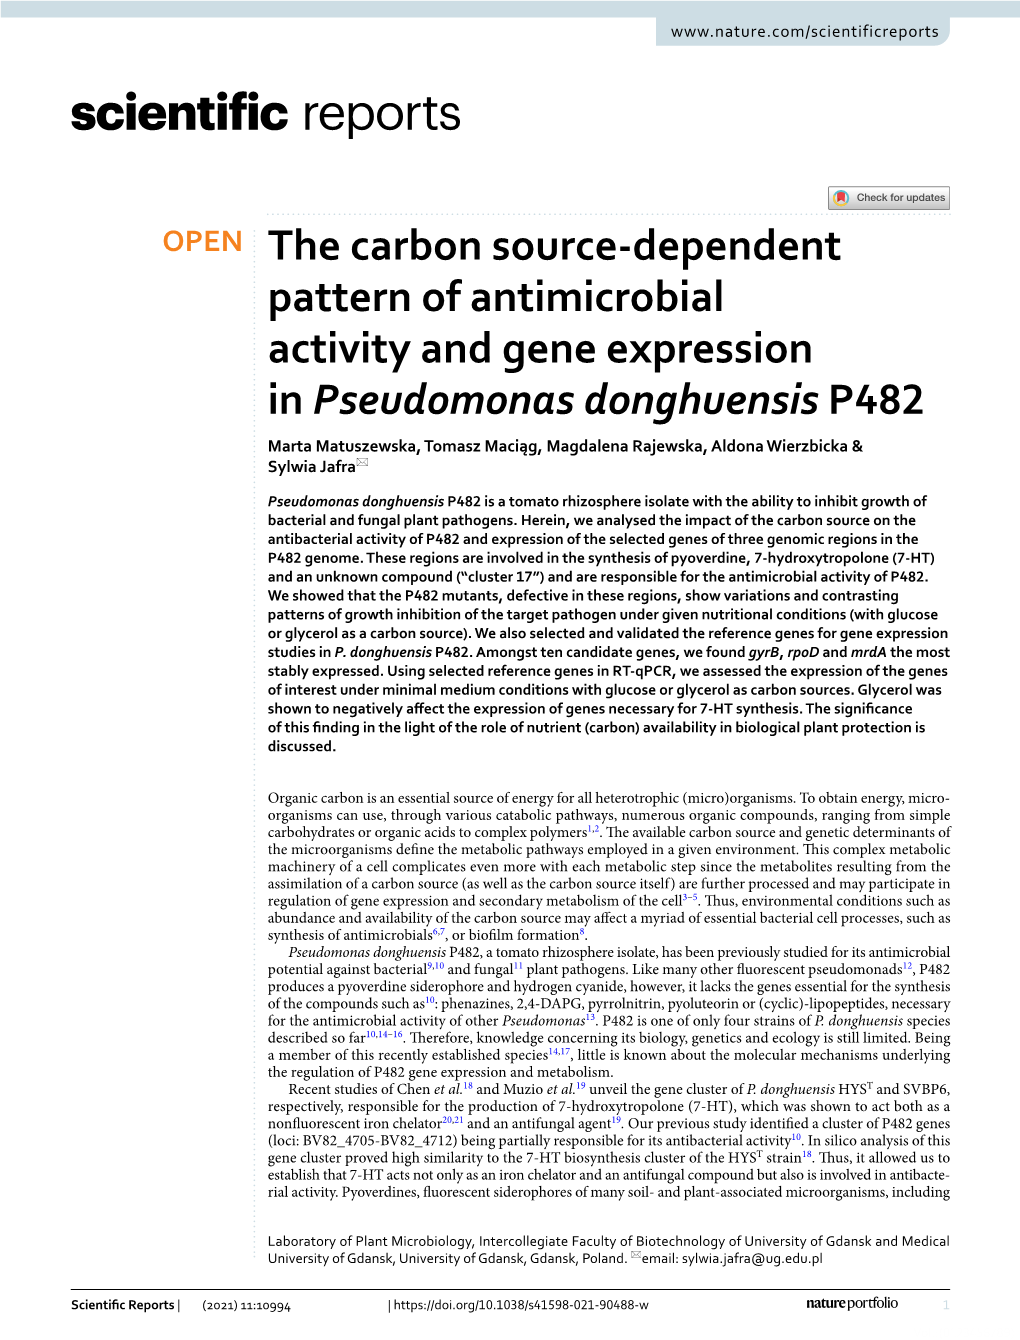 The Carbon Source-Dependent Pattern of Antimicrobial Activity and Gene Expression in Pseudomonas Donghuensis P482